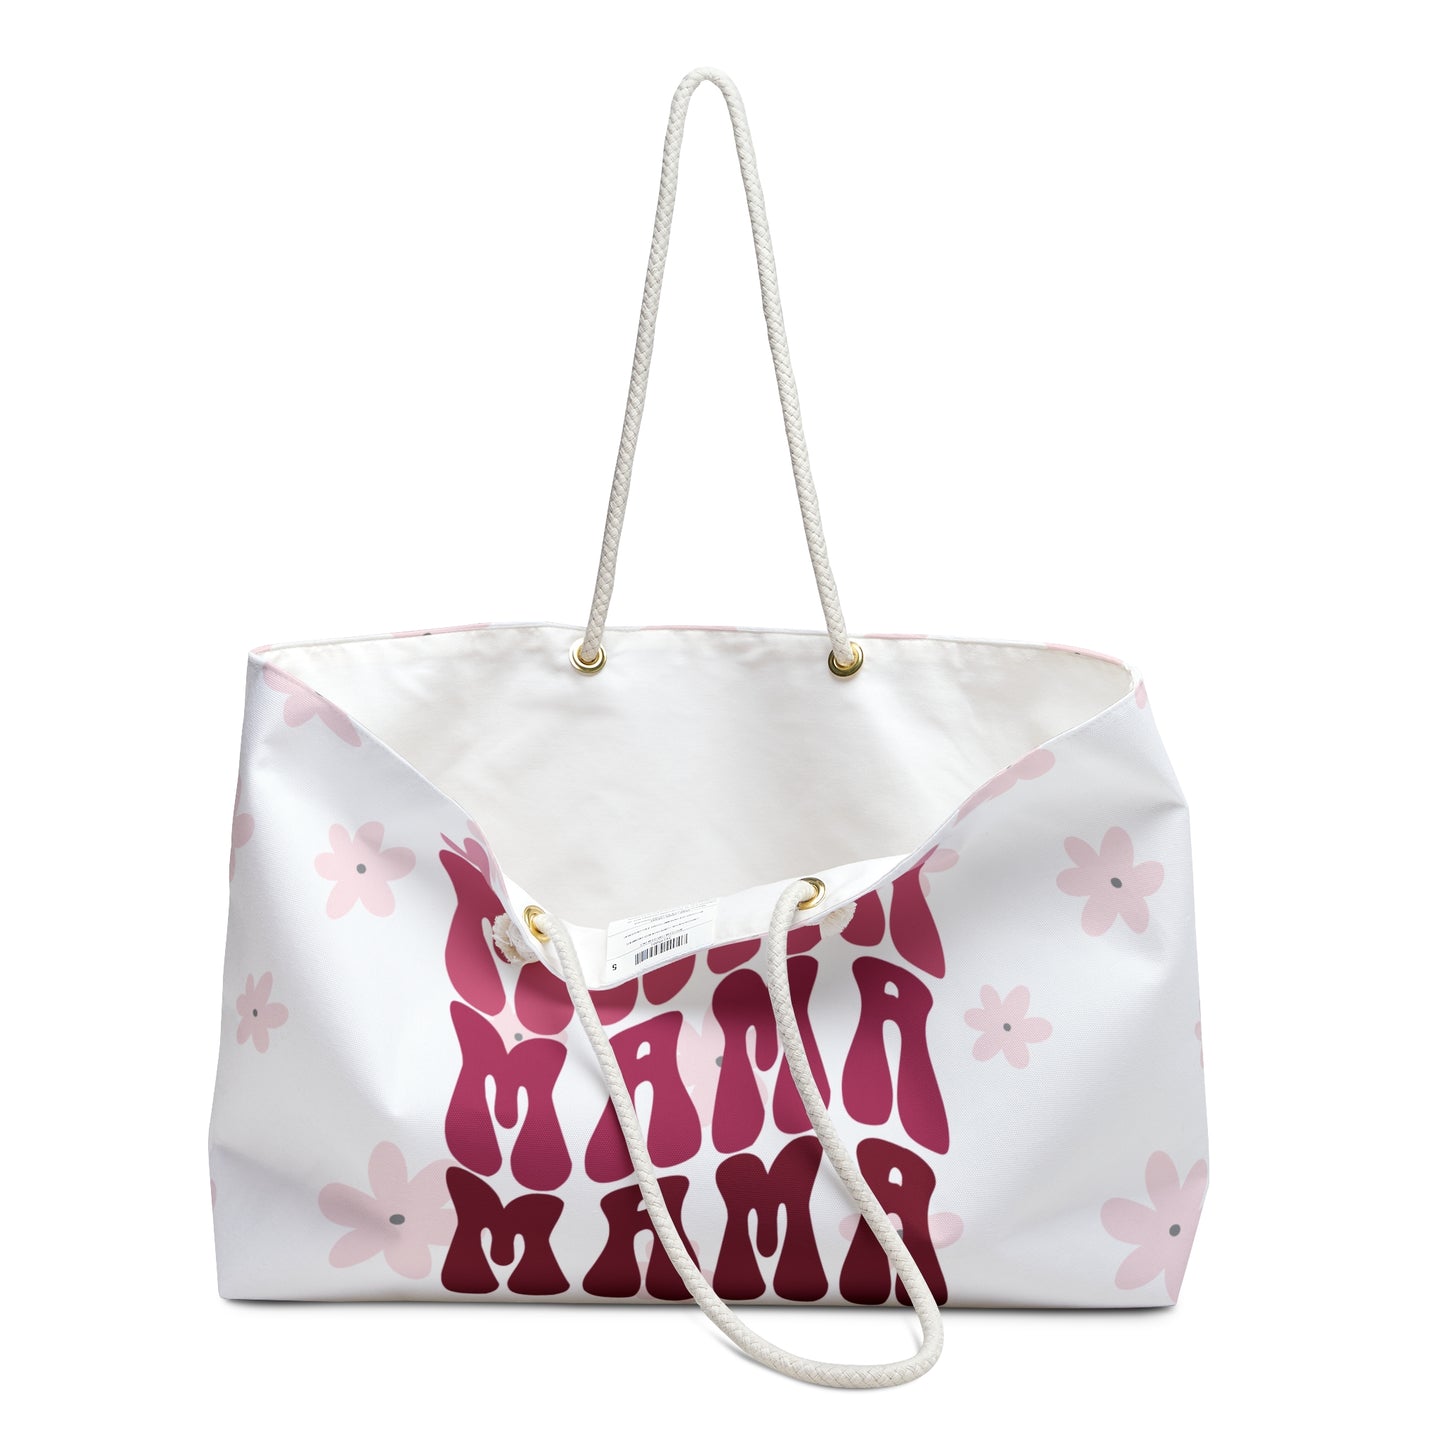 Personalized spacious Weekender Bag, Mother's Day, flower designs, Gifts for mom's day, custom mama bag (mama)